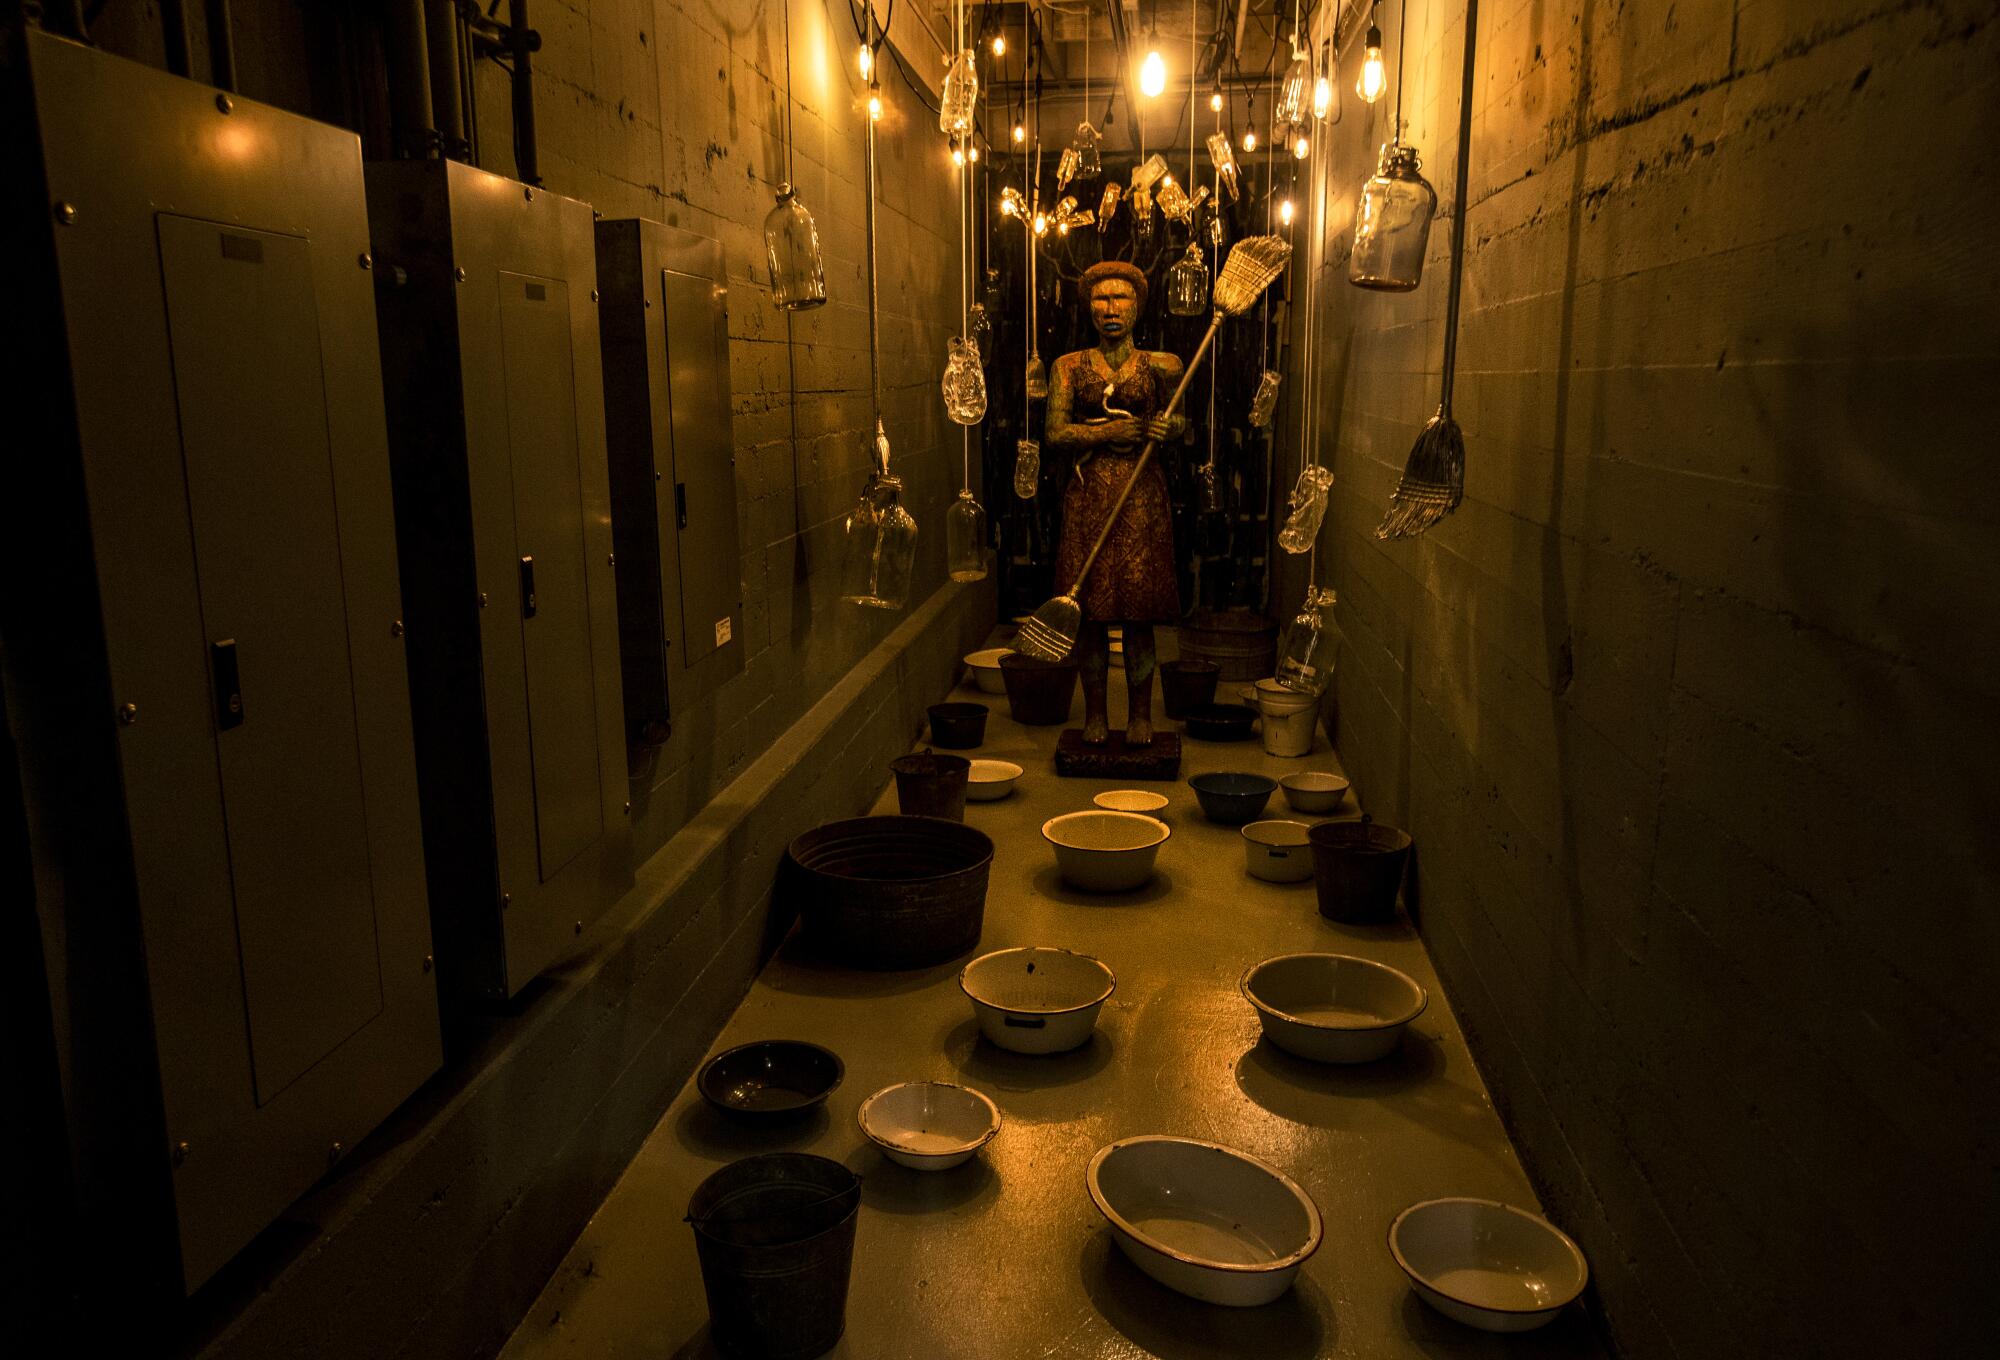 Alison Saar transforms a hallway into scene showing a woman amid washtubs and glowing lights. 